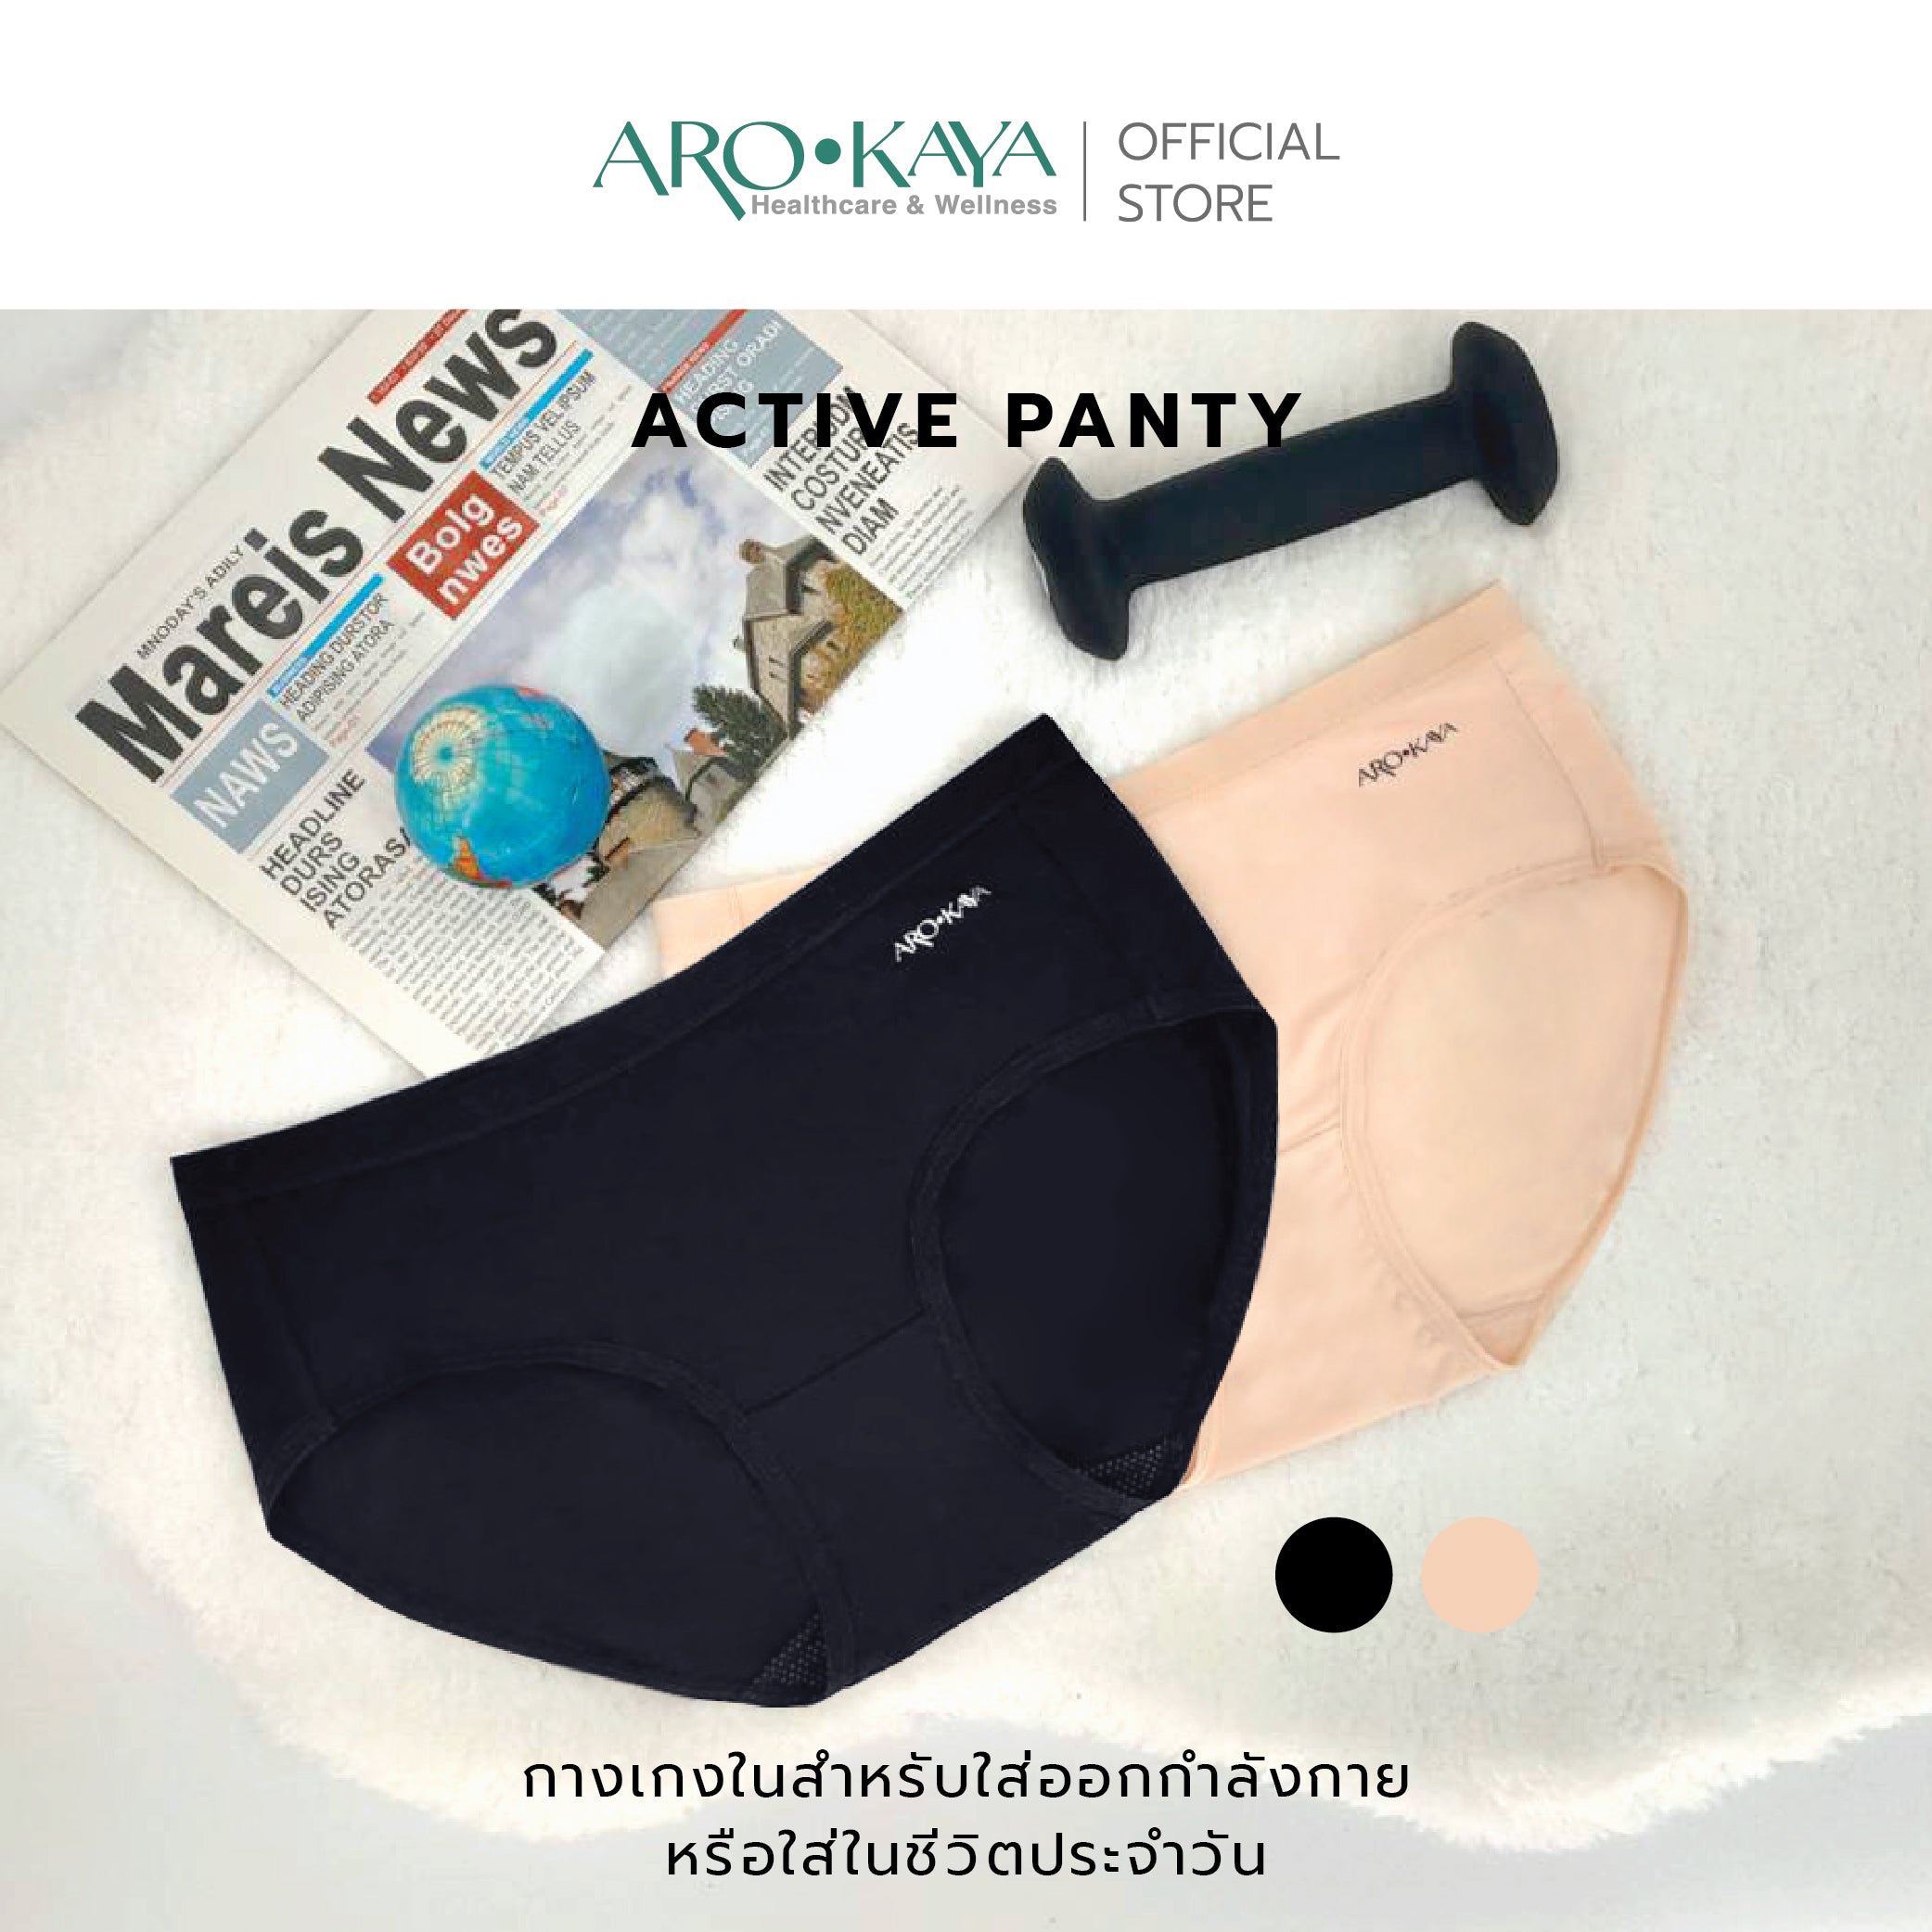 ACTIVE PANTY